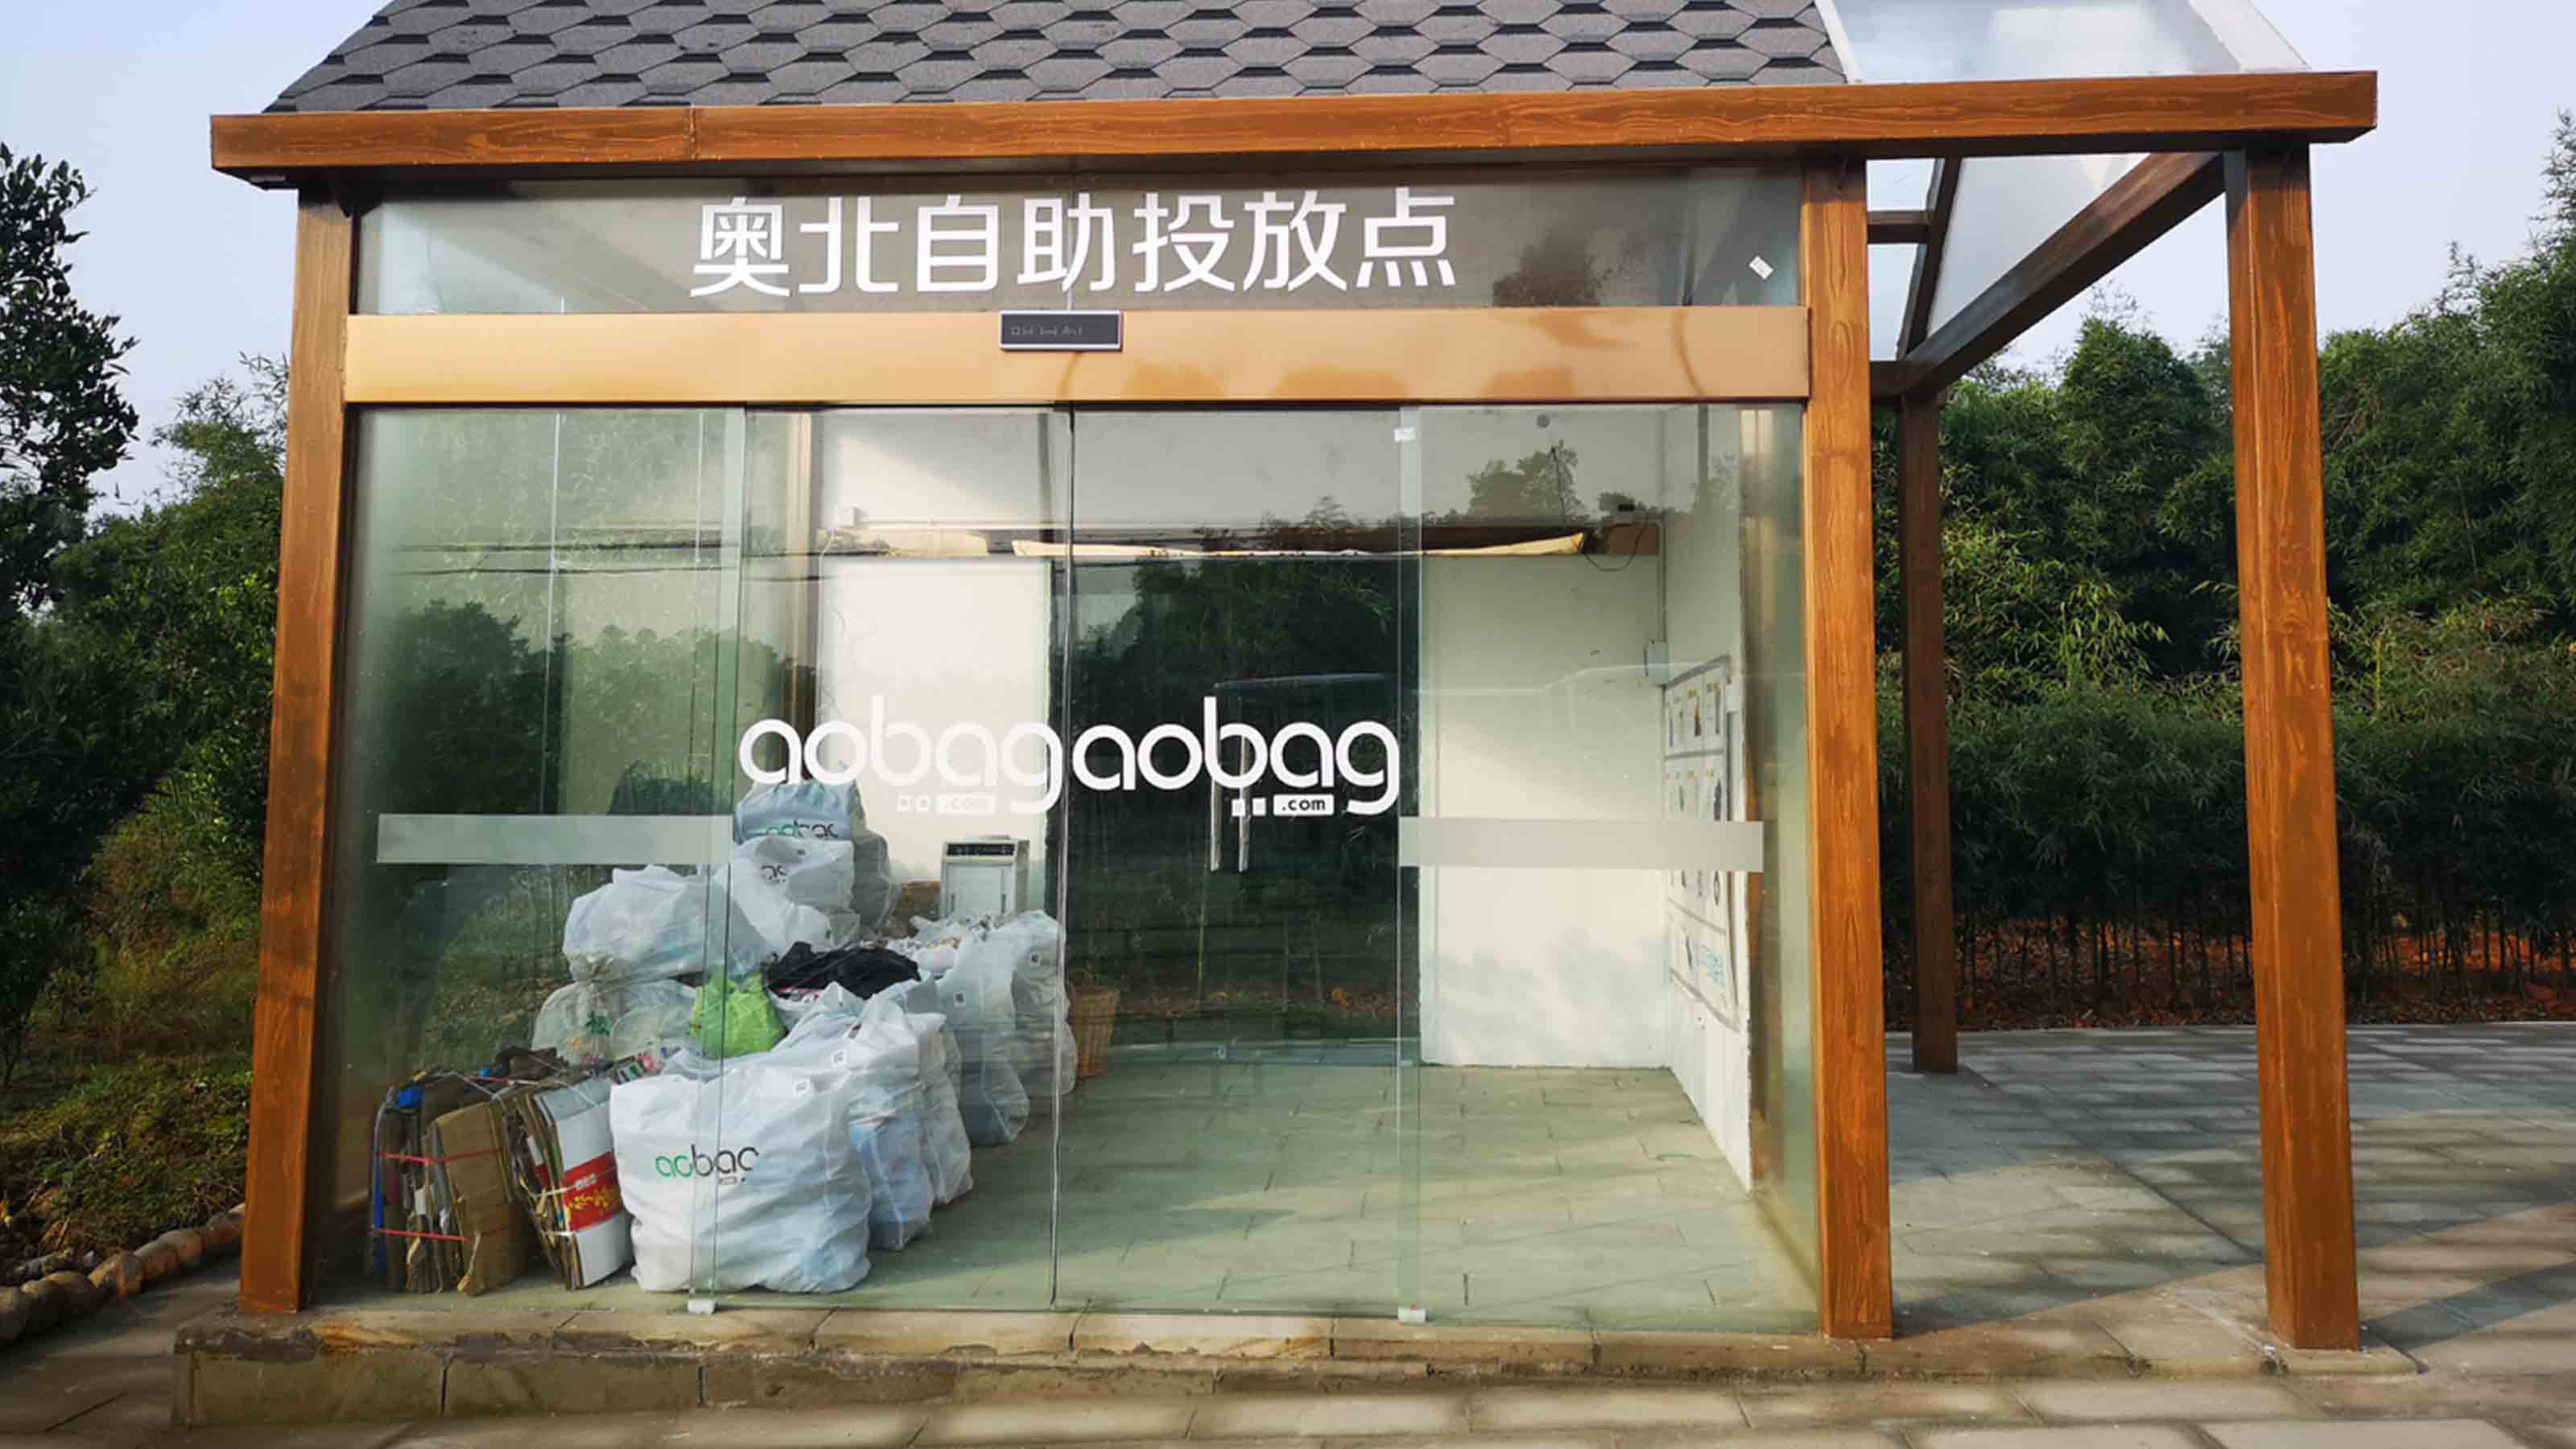 AOBag collection point